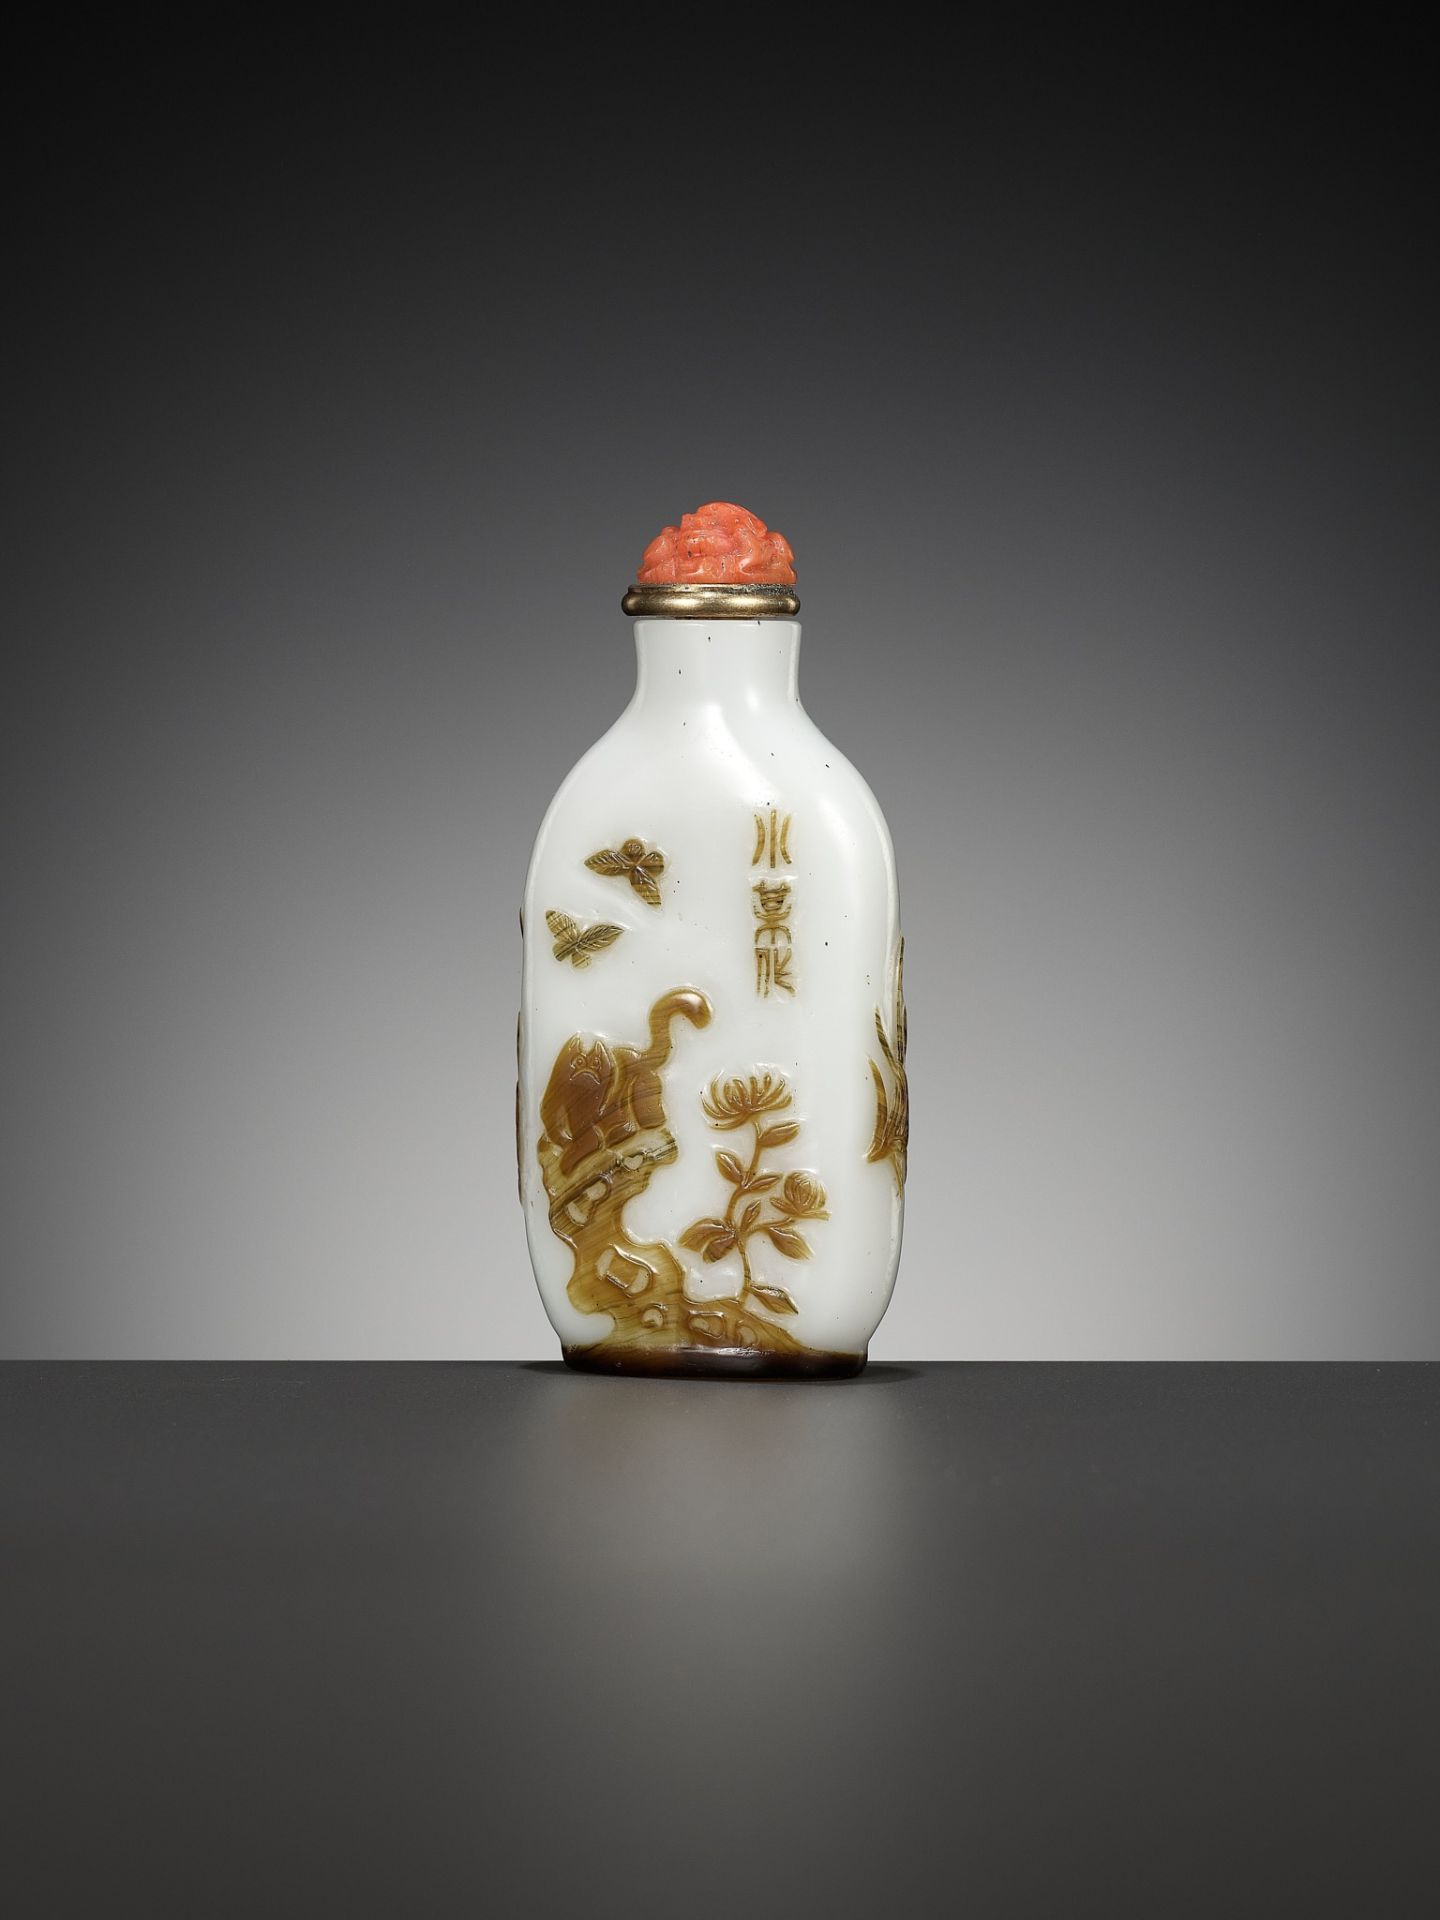 AN INSCRIBED OVERLAY GLASS ‘CAT AND BUTTERFLY’ SNUFF BOTTLE, BY WANG SU, YANGZHOU SCHOOL, 1820-1840 - Image 11 of 19